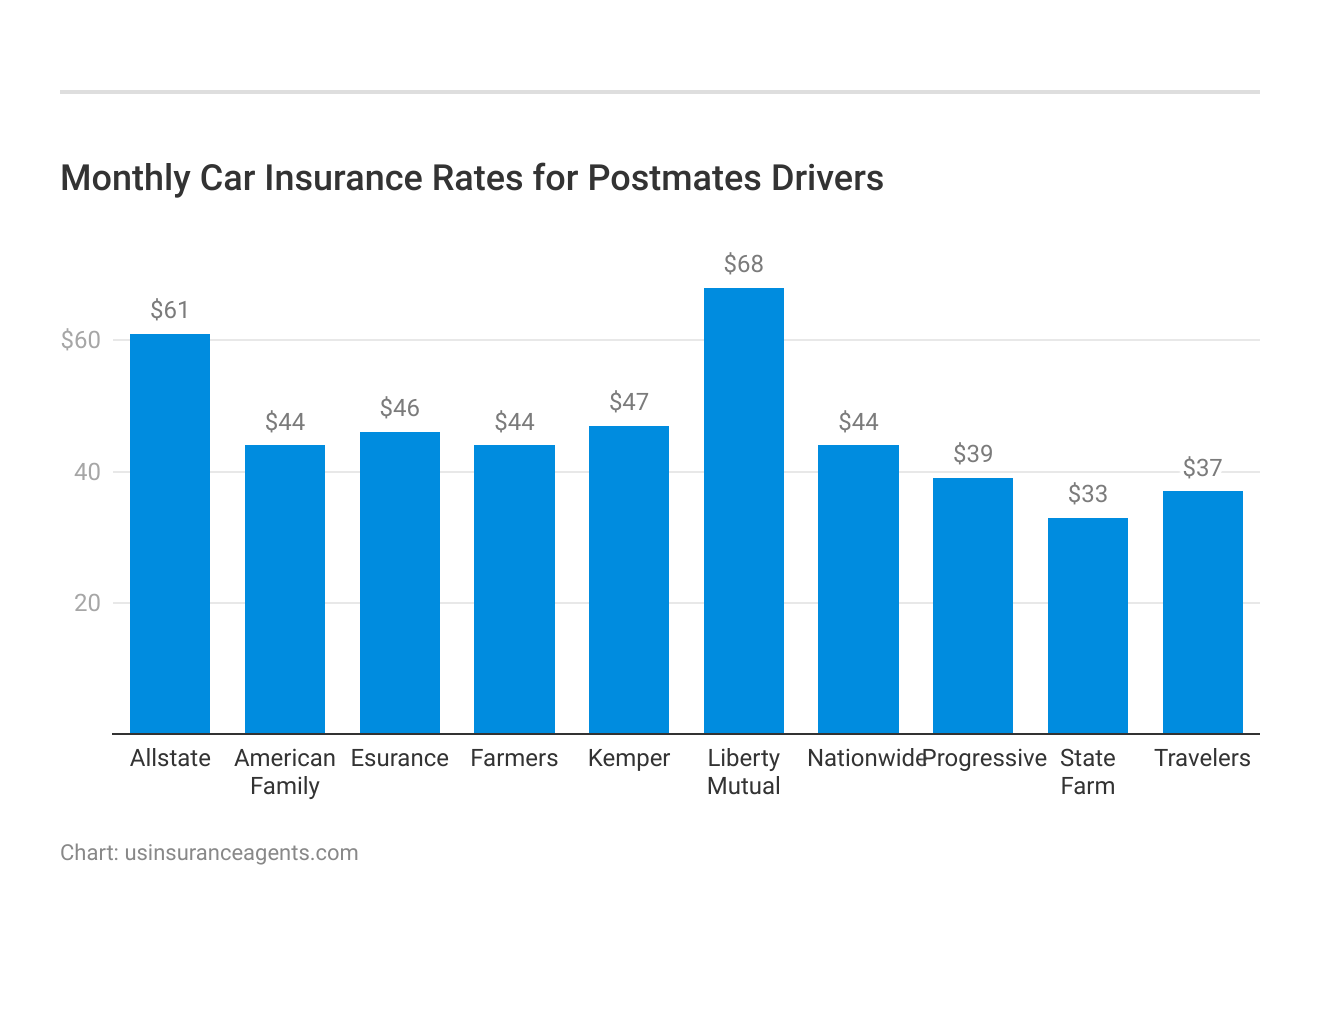 <h3>Monthly Car Insurance Rates for Postmates Drivers</h3>